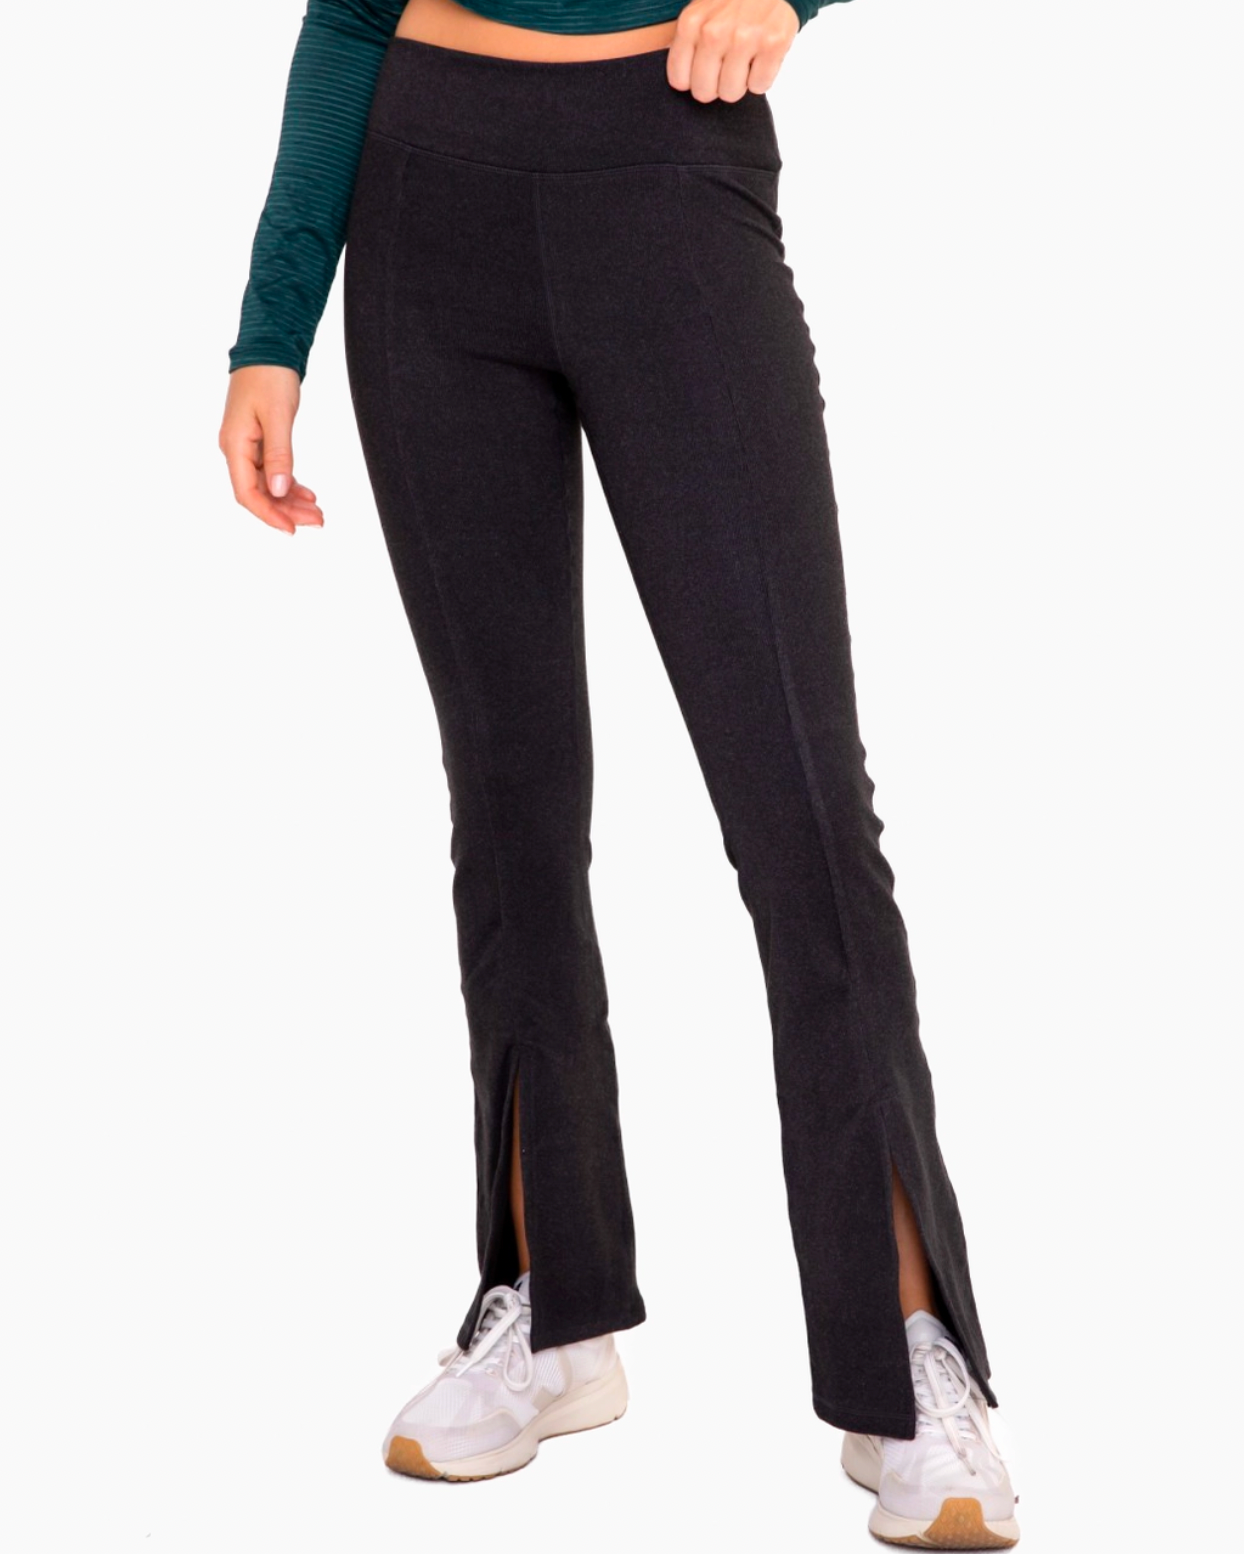 Model wearing Mono B Brushed Ribbed Flare Leggings wearing white sneakers and a green shirt on a white background